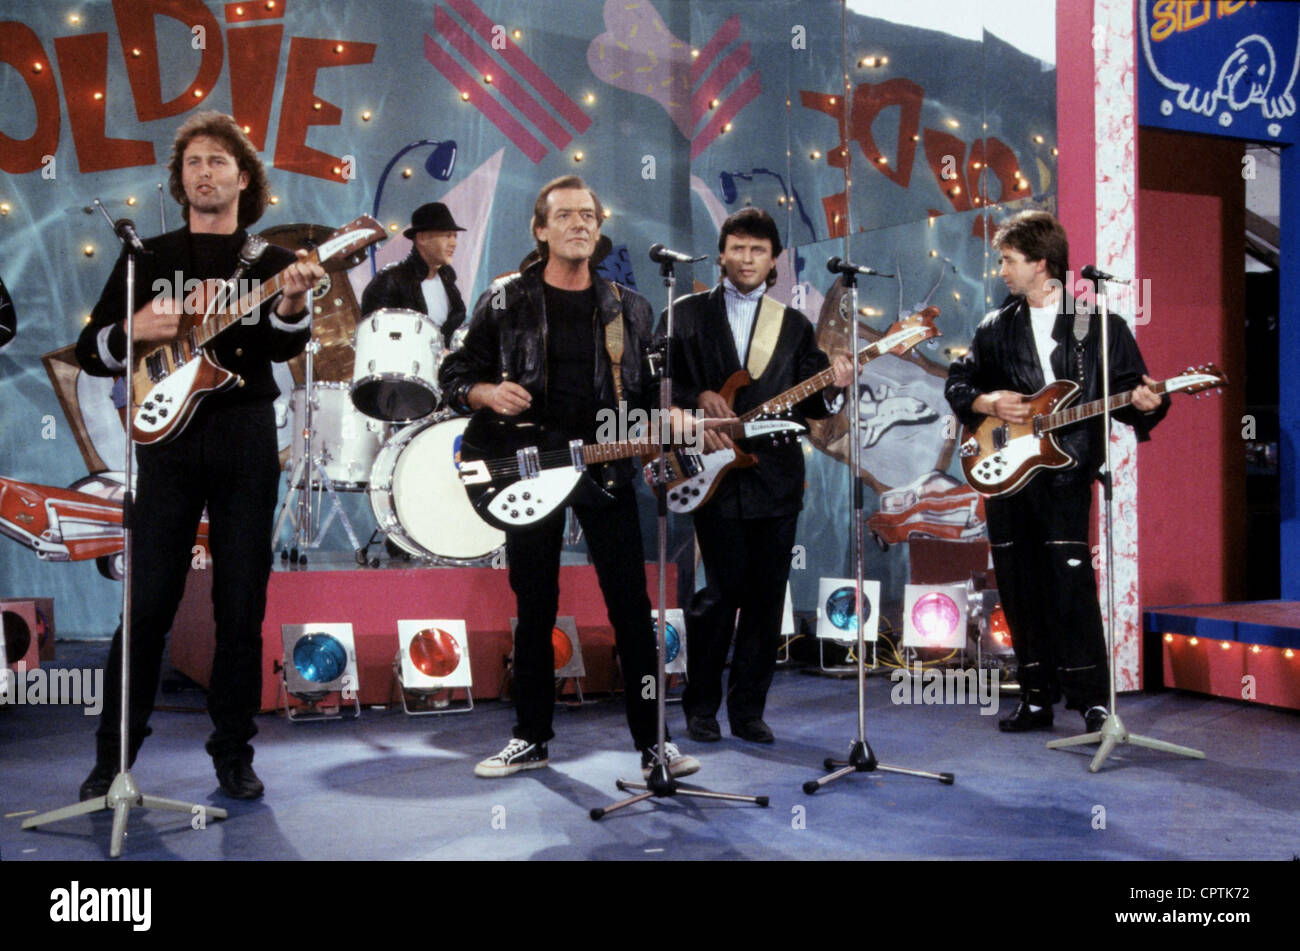 The Hollies, British rock group, formed in 1962, during a show, September 1989, Stock Photo